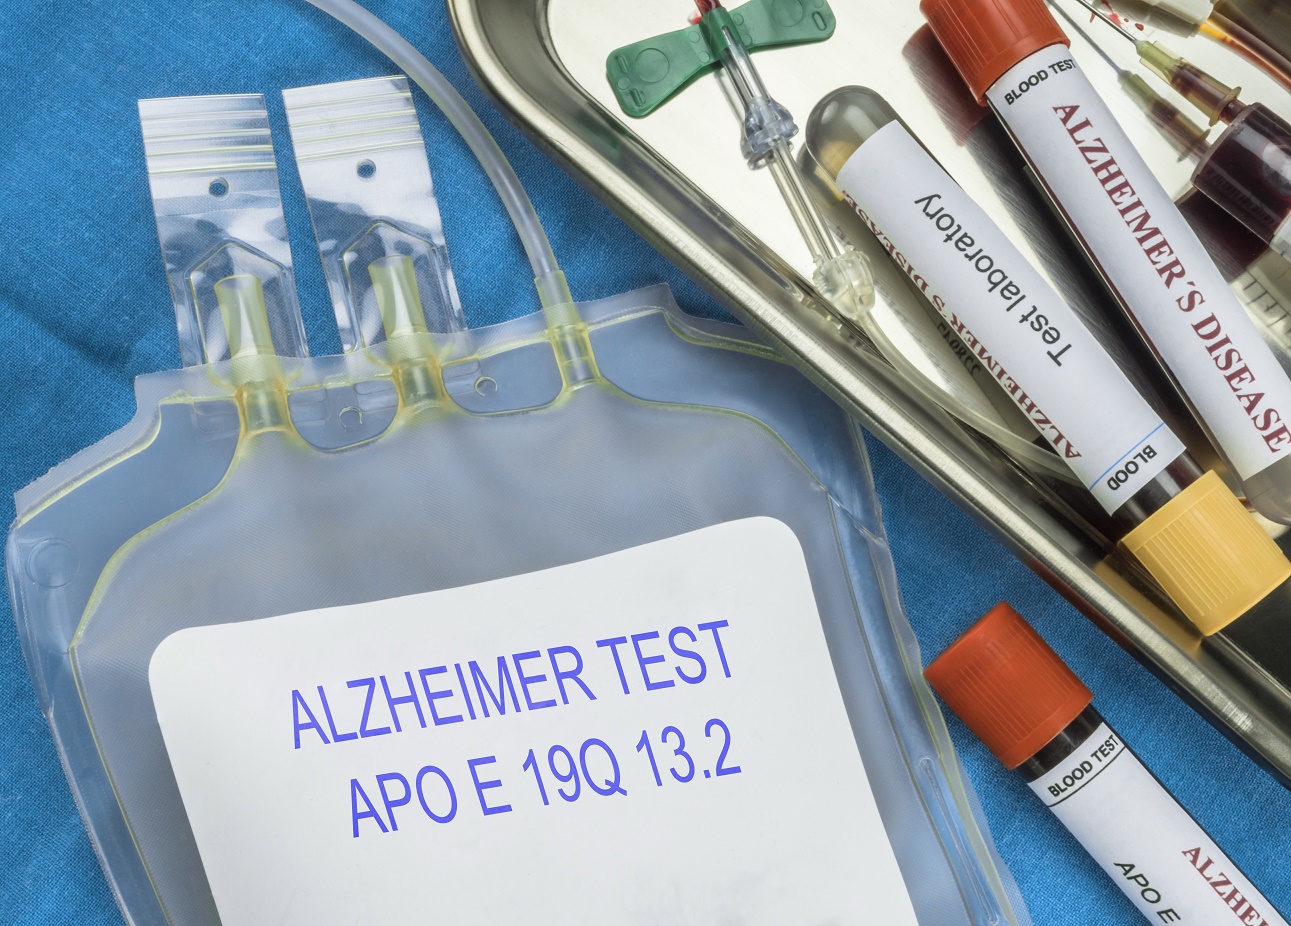 A potential way to treat Alzheimer’s disease discovered